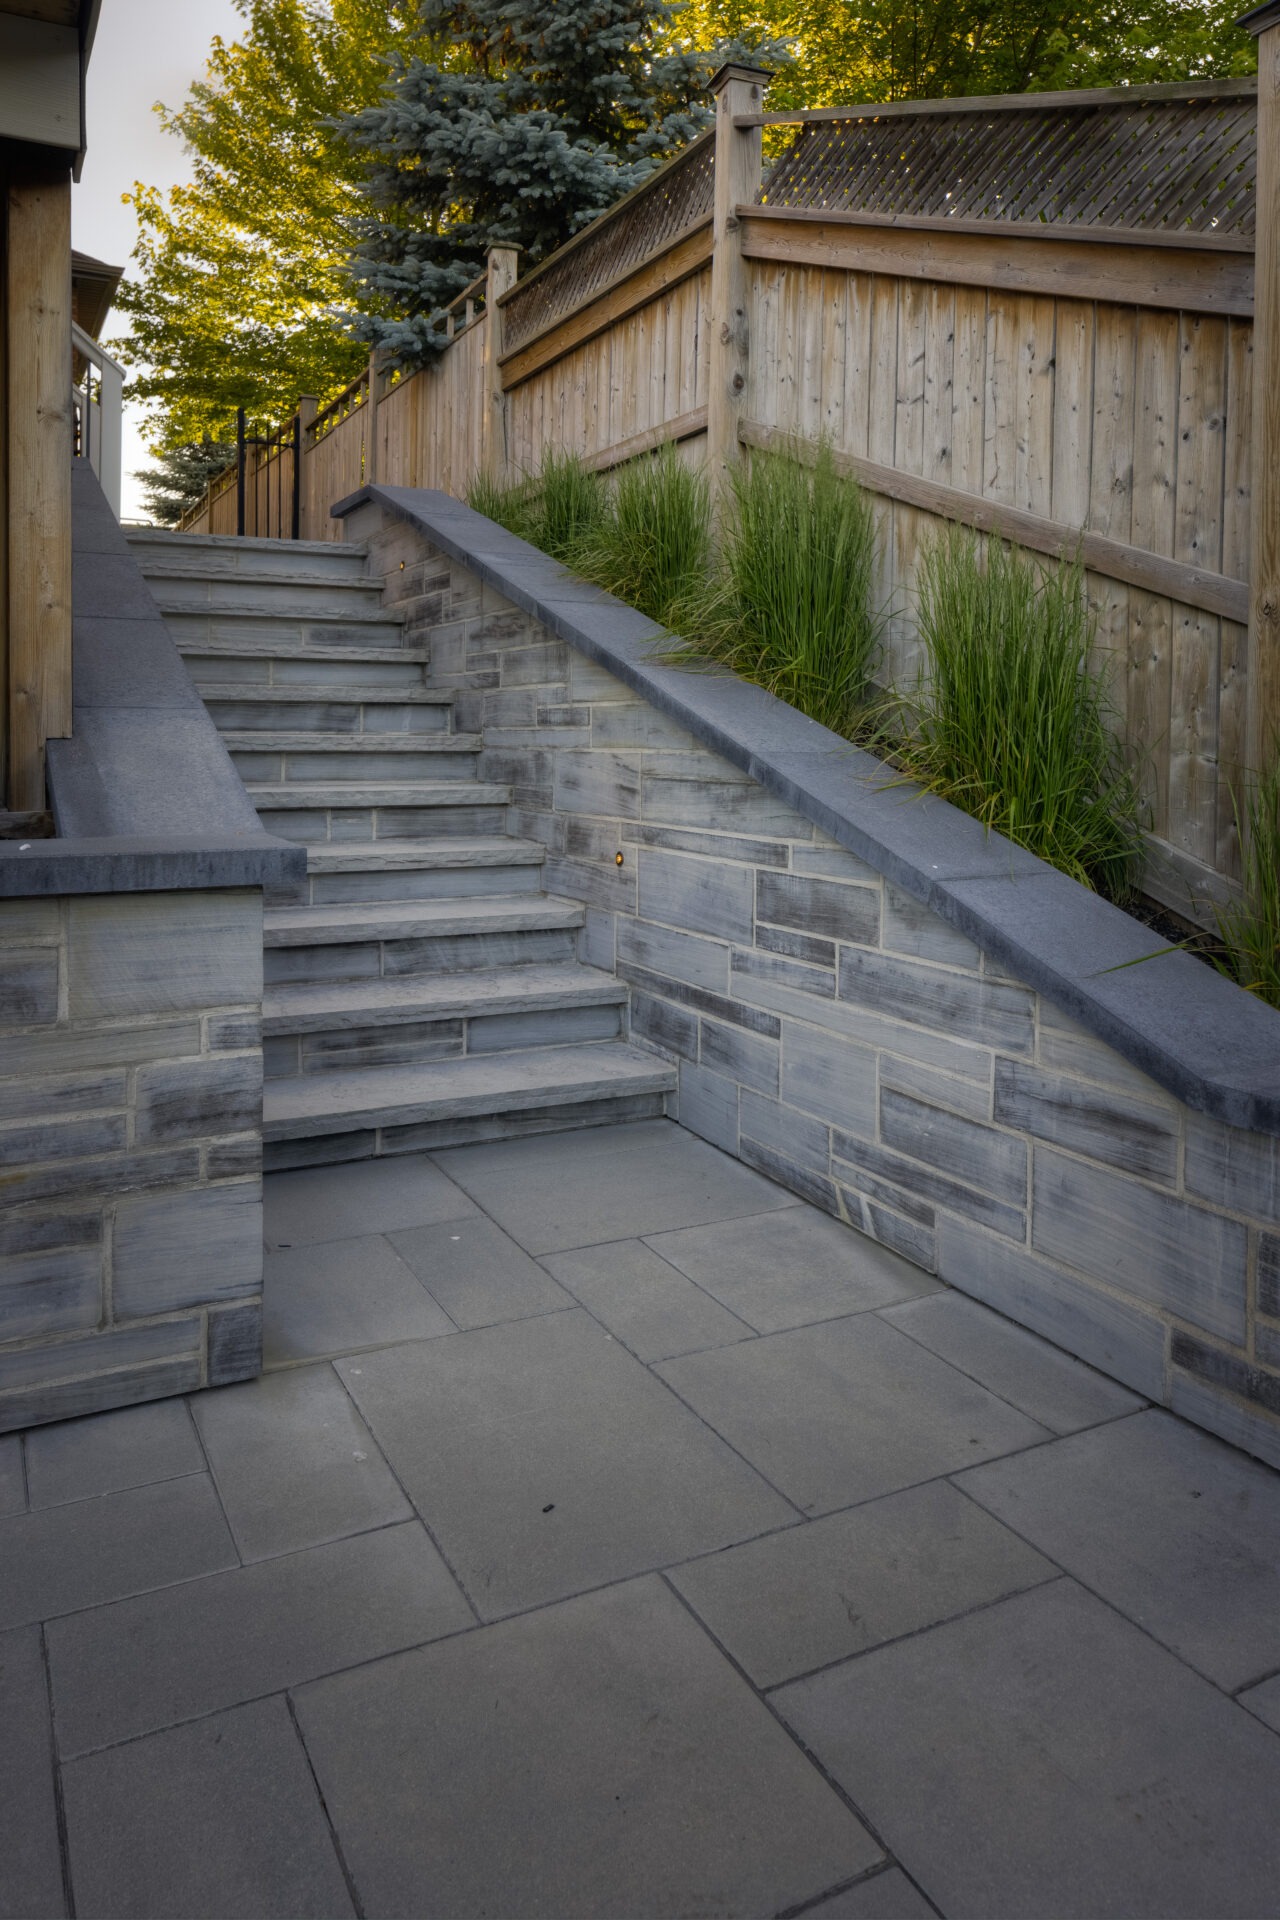 An outdoor staircase with gray stone steps framed by a wooden fence and tall grasses, leading to a garden area with trees.